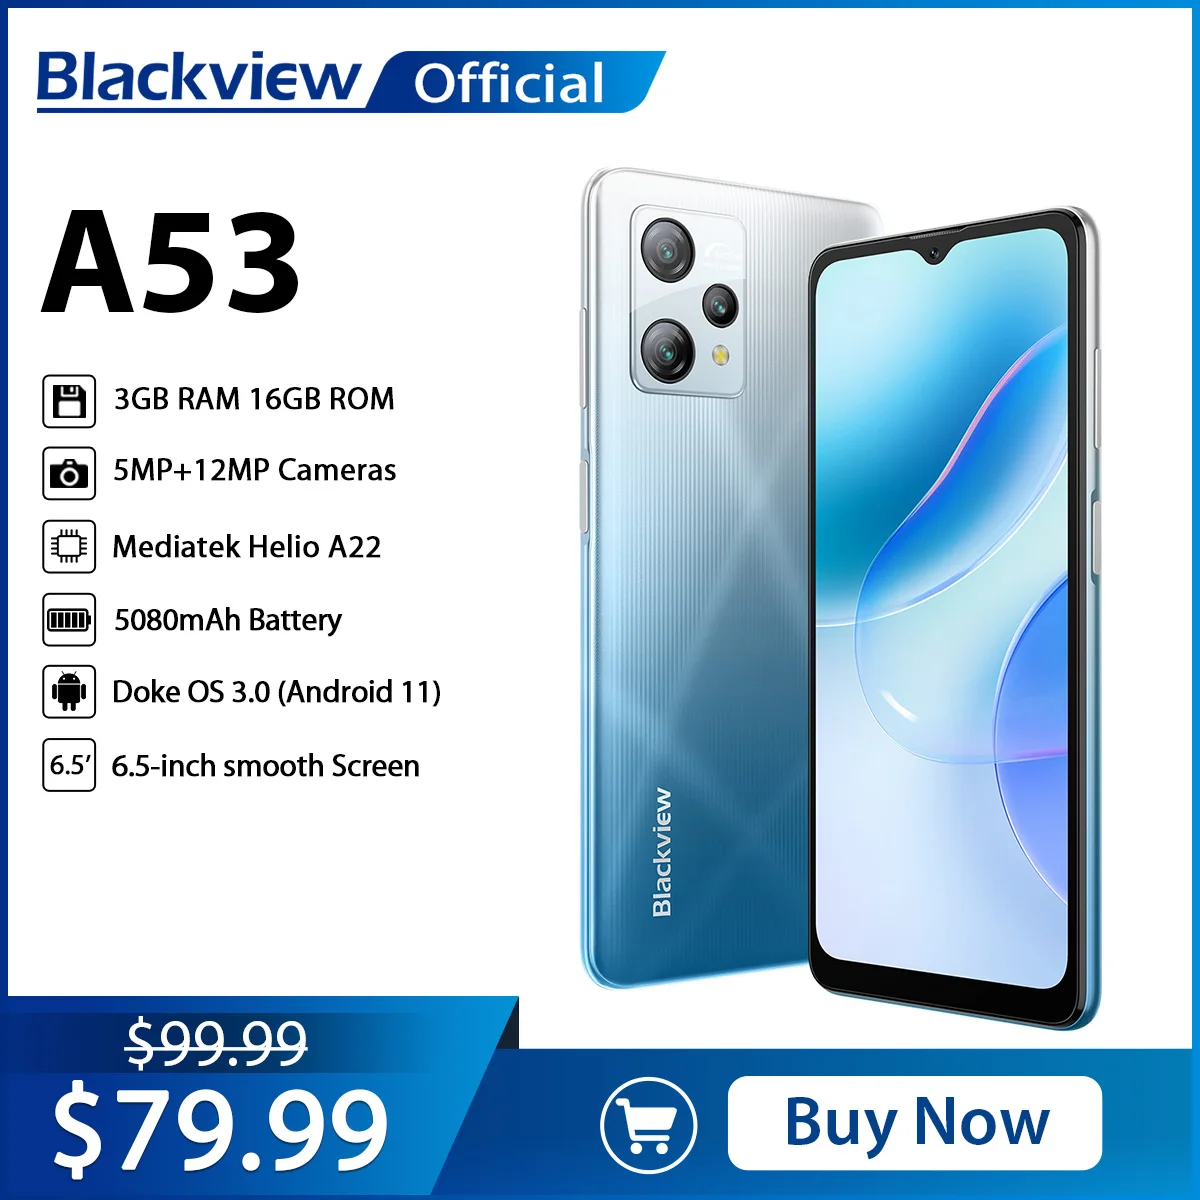 Blackview A53 Smartphone 3GB+16GB 6.5 Inch Android 12 Cellphone Quad Core Mobile Phone 5080mAh Dual 4G 12MP Rear Cameras